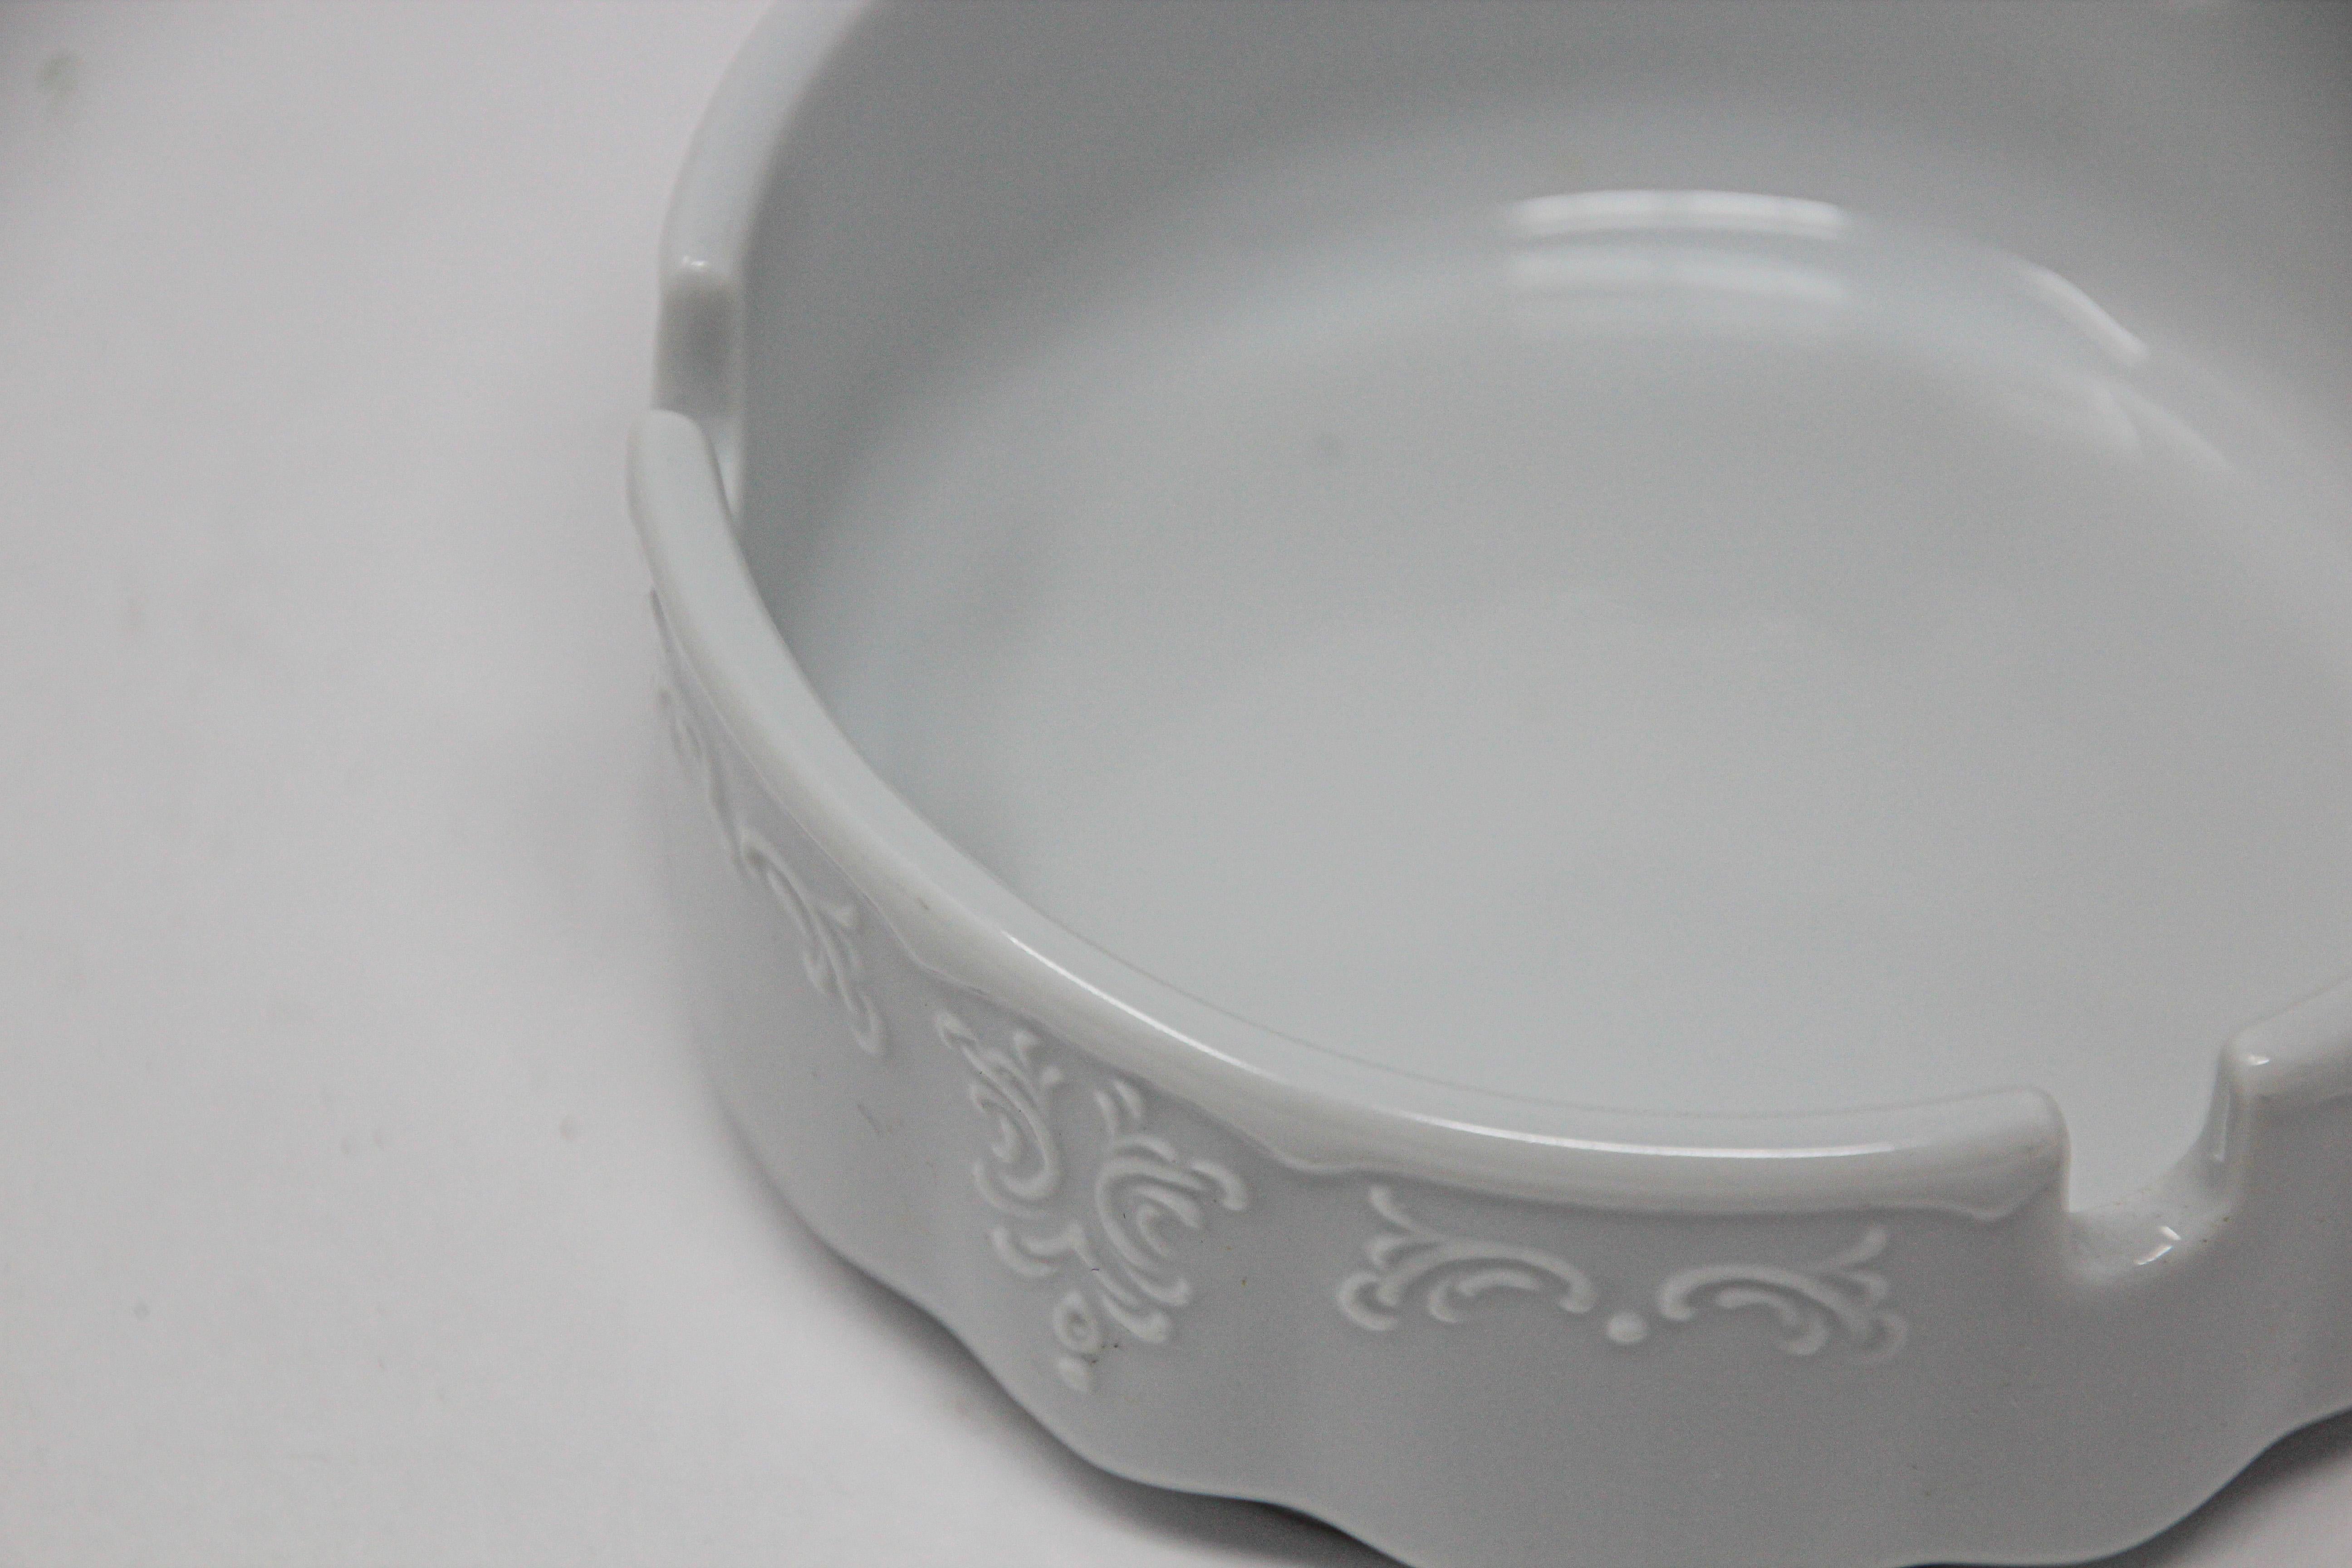 Vintage pure white china ashtray.
With a fresh, contemporary modern look with embossed arabesques design.
Hotelporzellan, Hogermann.
Made in Germany, circa 1980.
Measures: 4.5